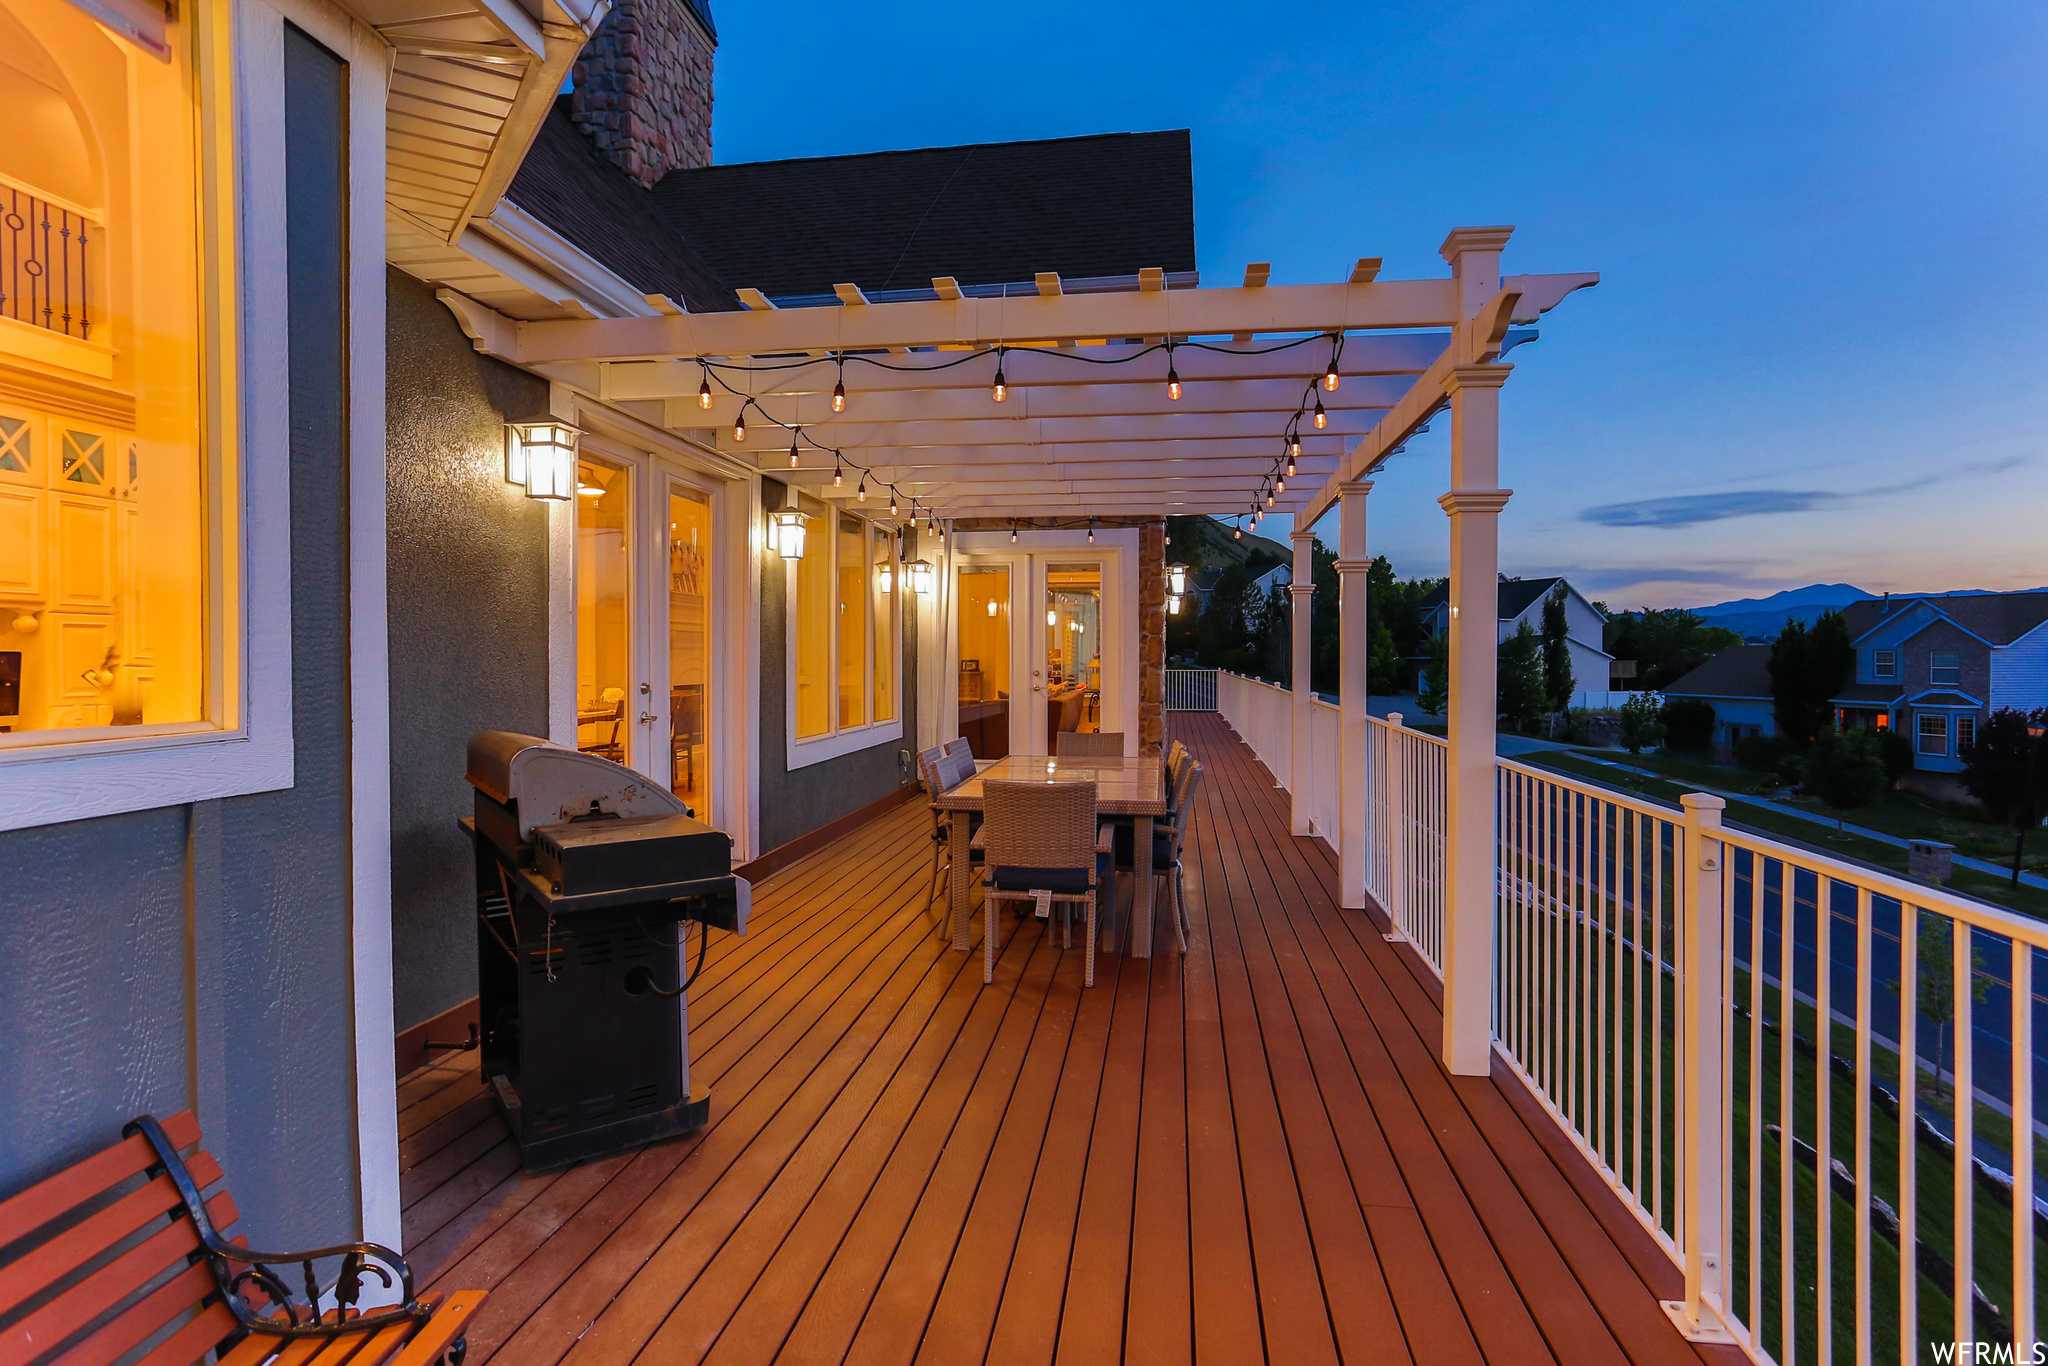 Deck at dusk featuring a pergola on the wrap around deck.